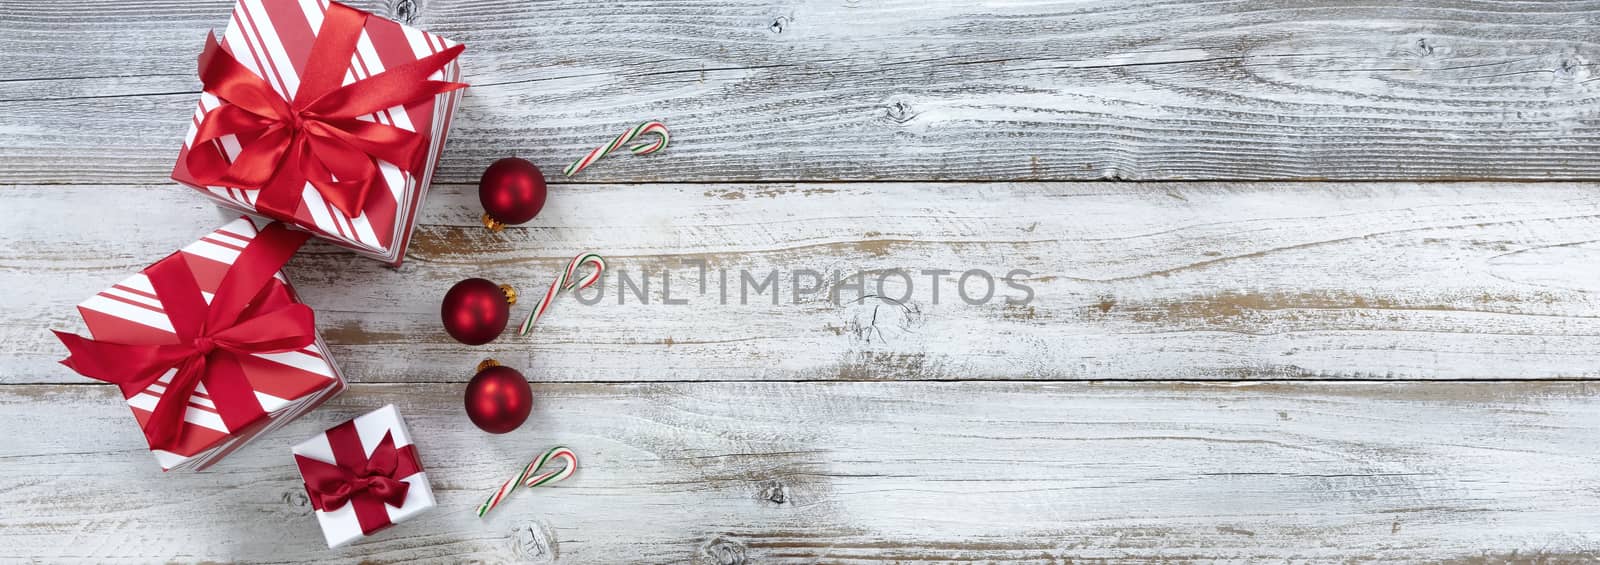 Merry Christmas with boxed gifts and ornaments on white rustic wooden background for the holiday